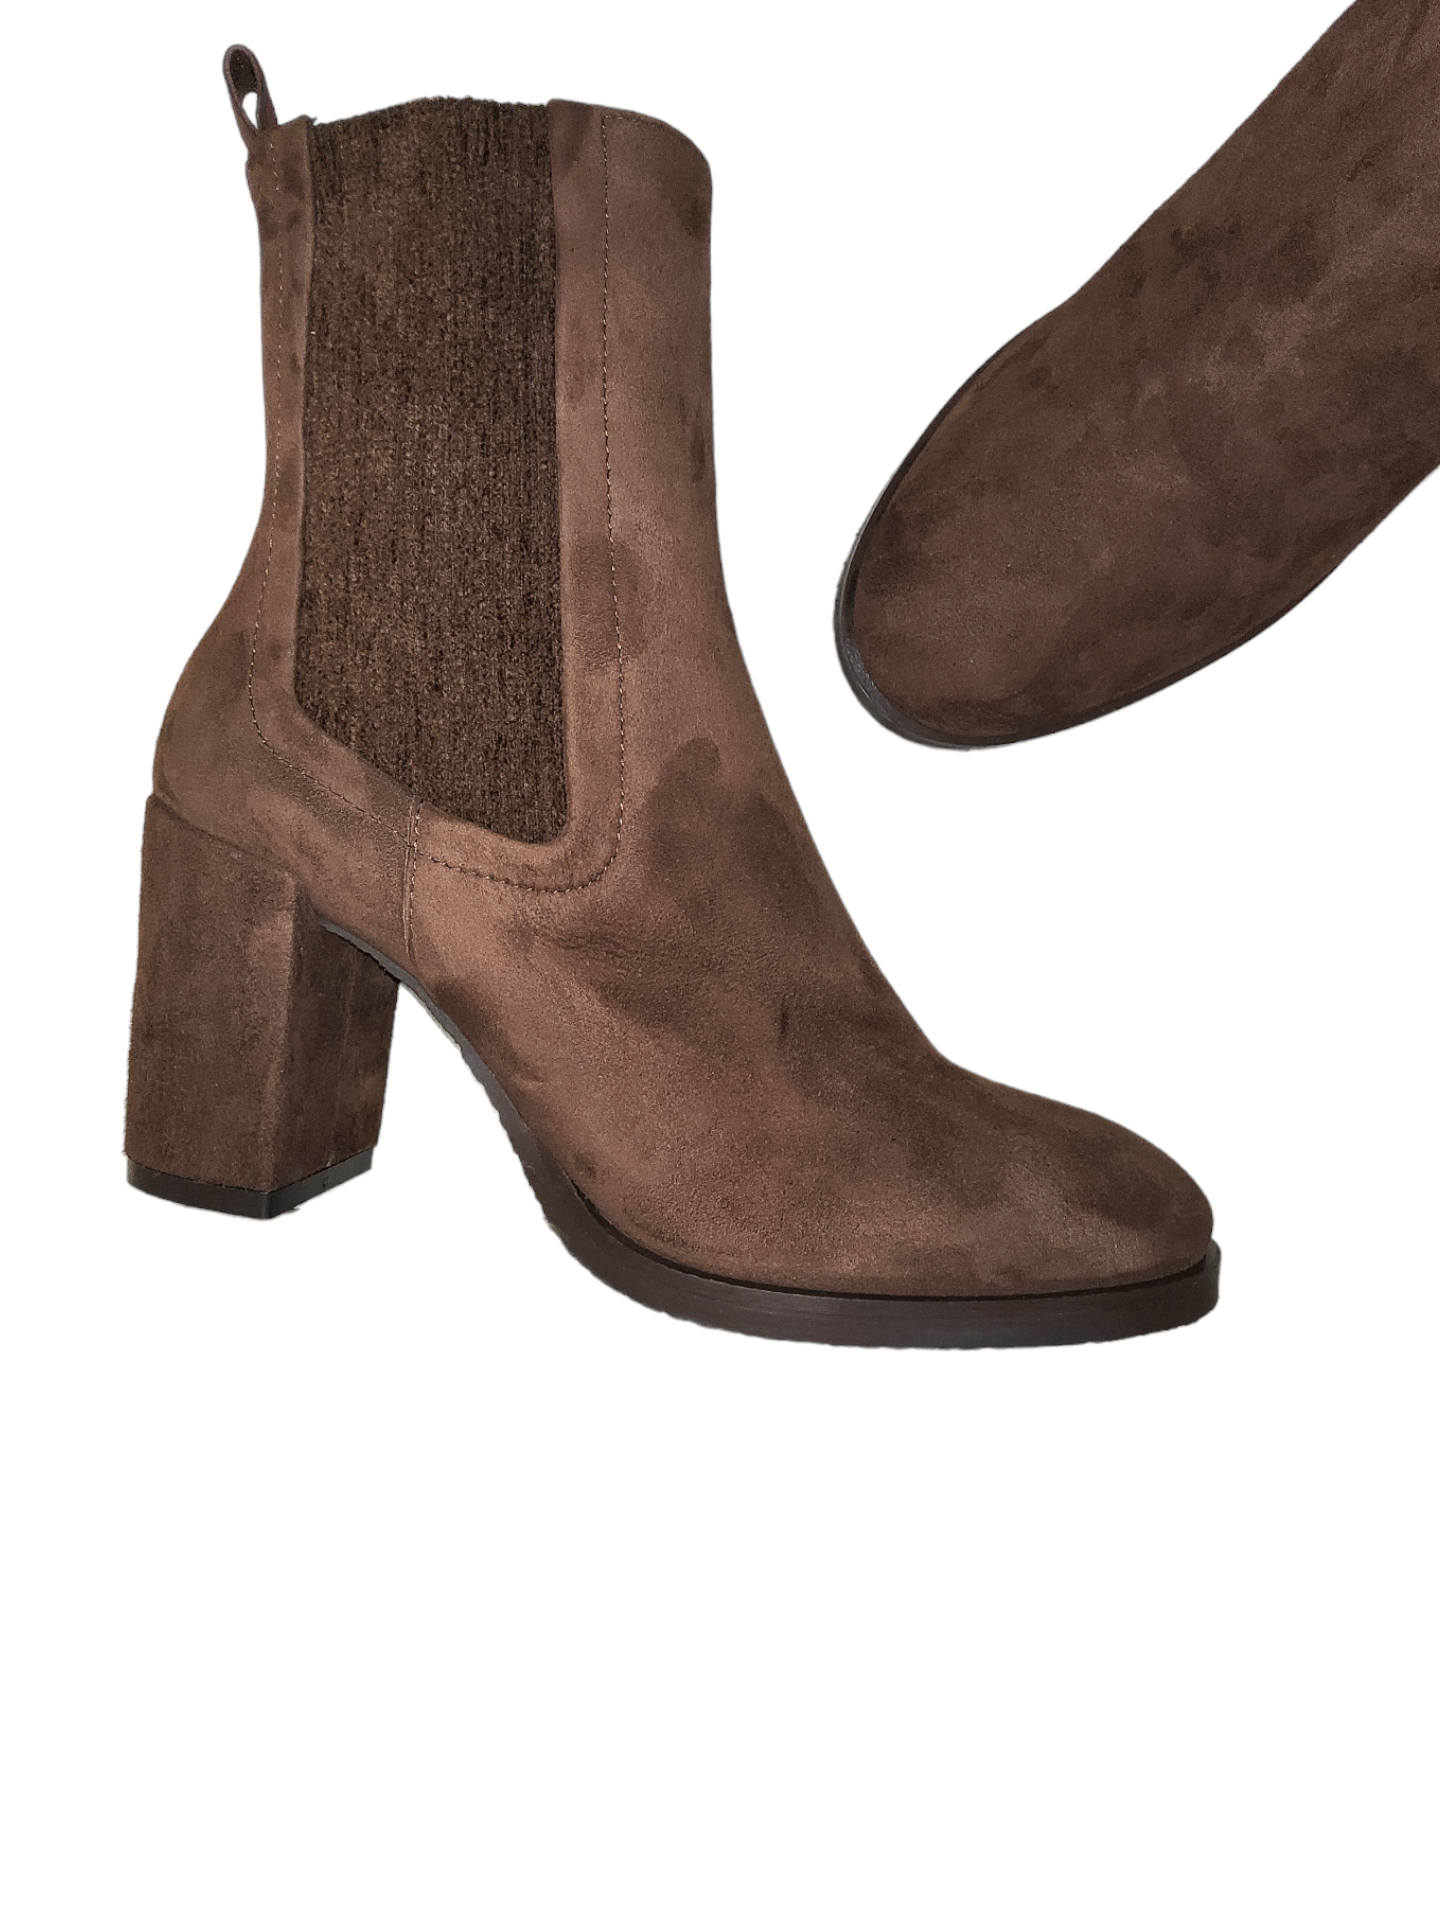 Brown suede leather Chelsea boots